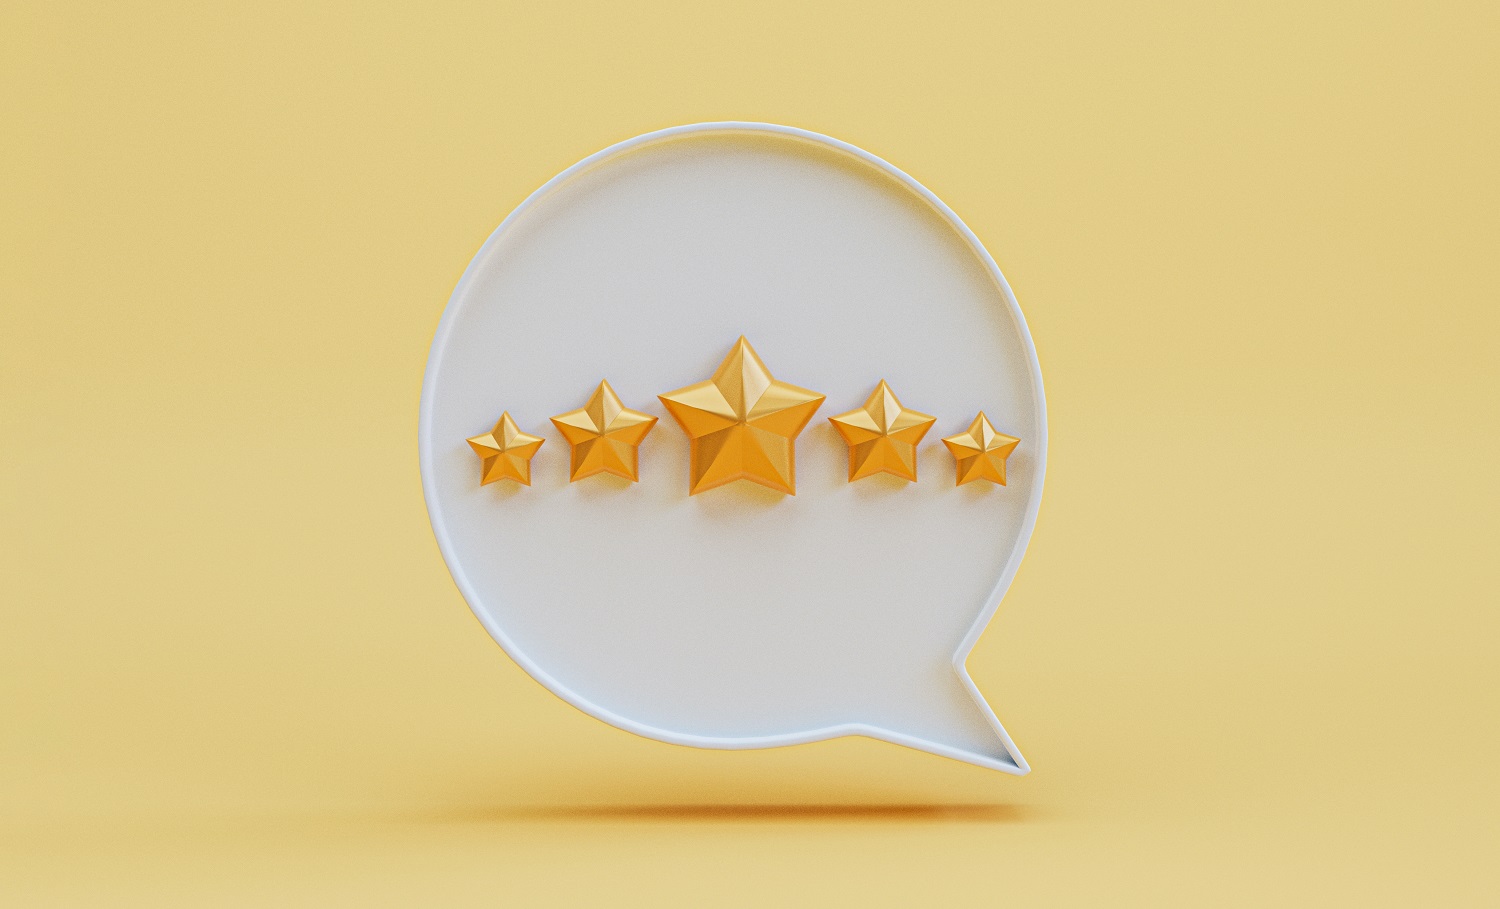 Five stars enclosed in a message symbol